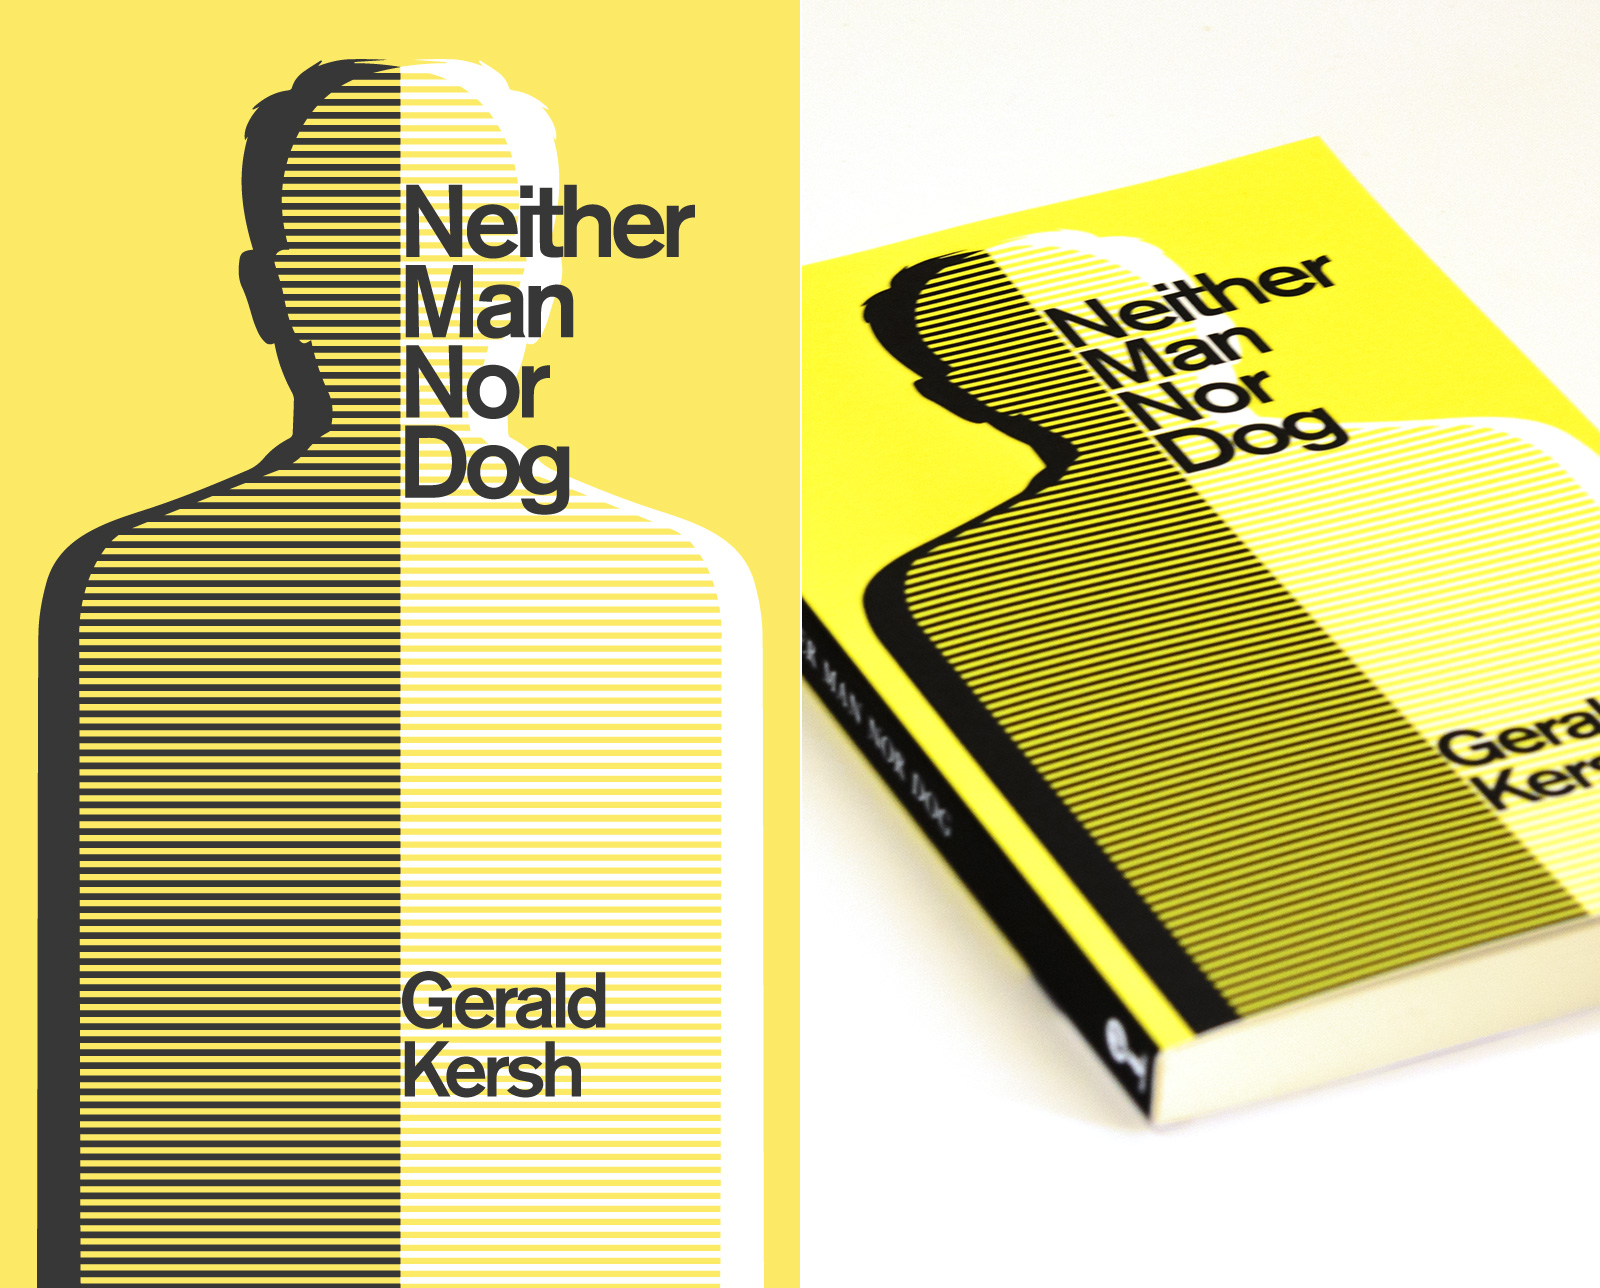 Neither Man Nor Dog by Gerald Kersh